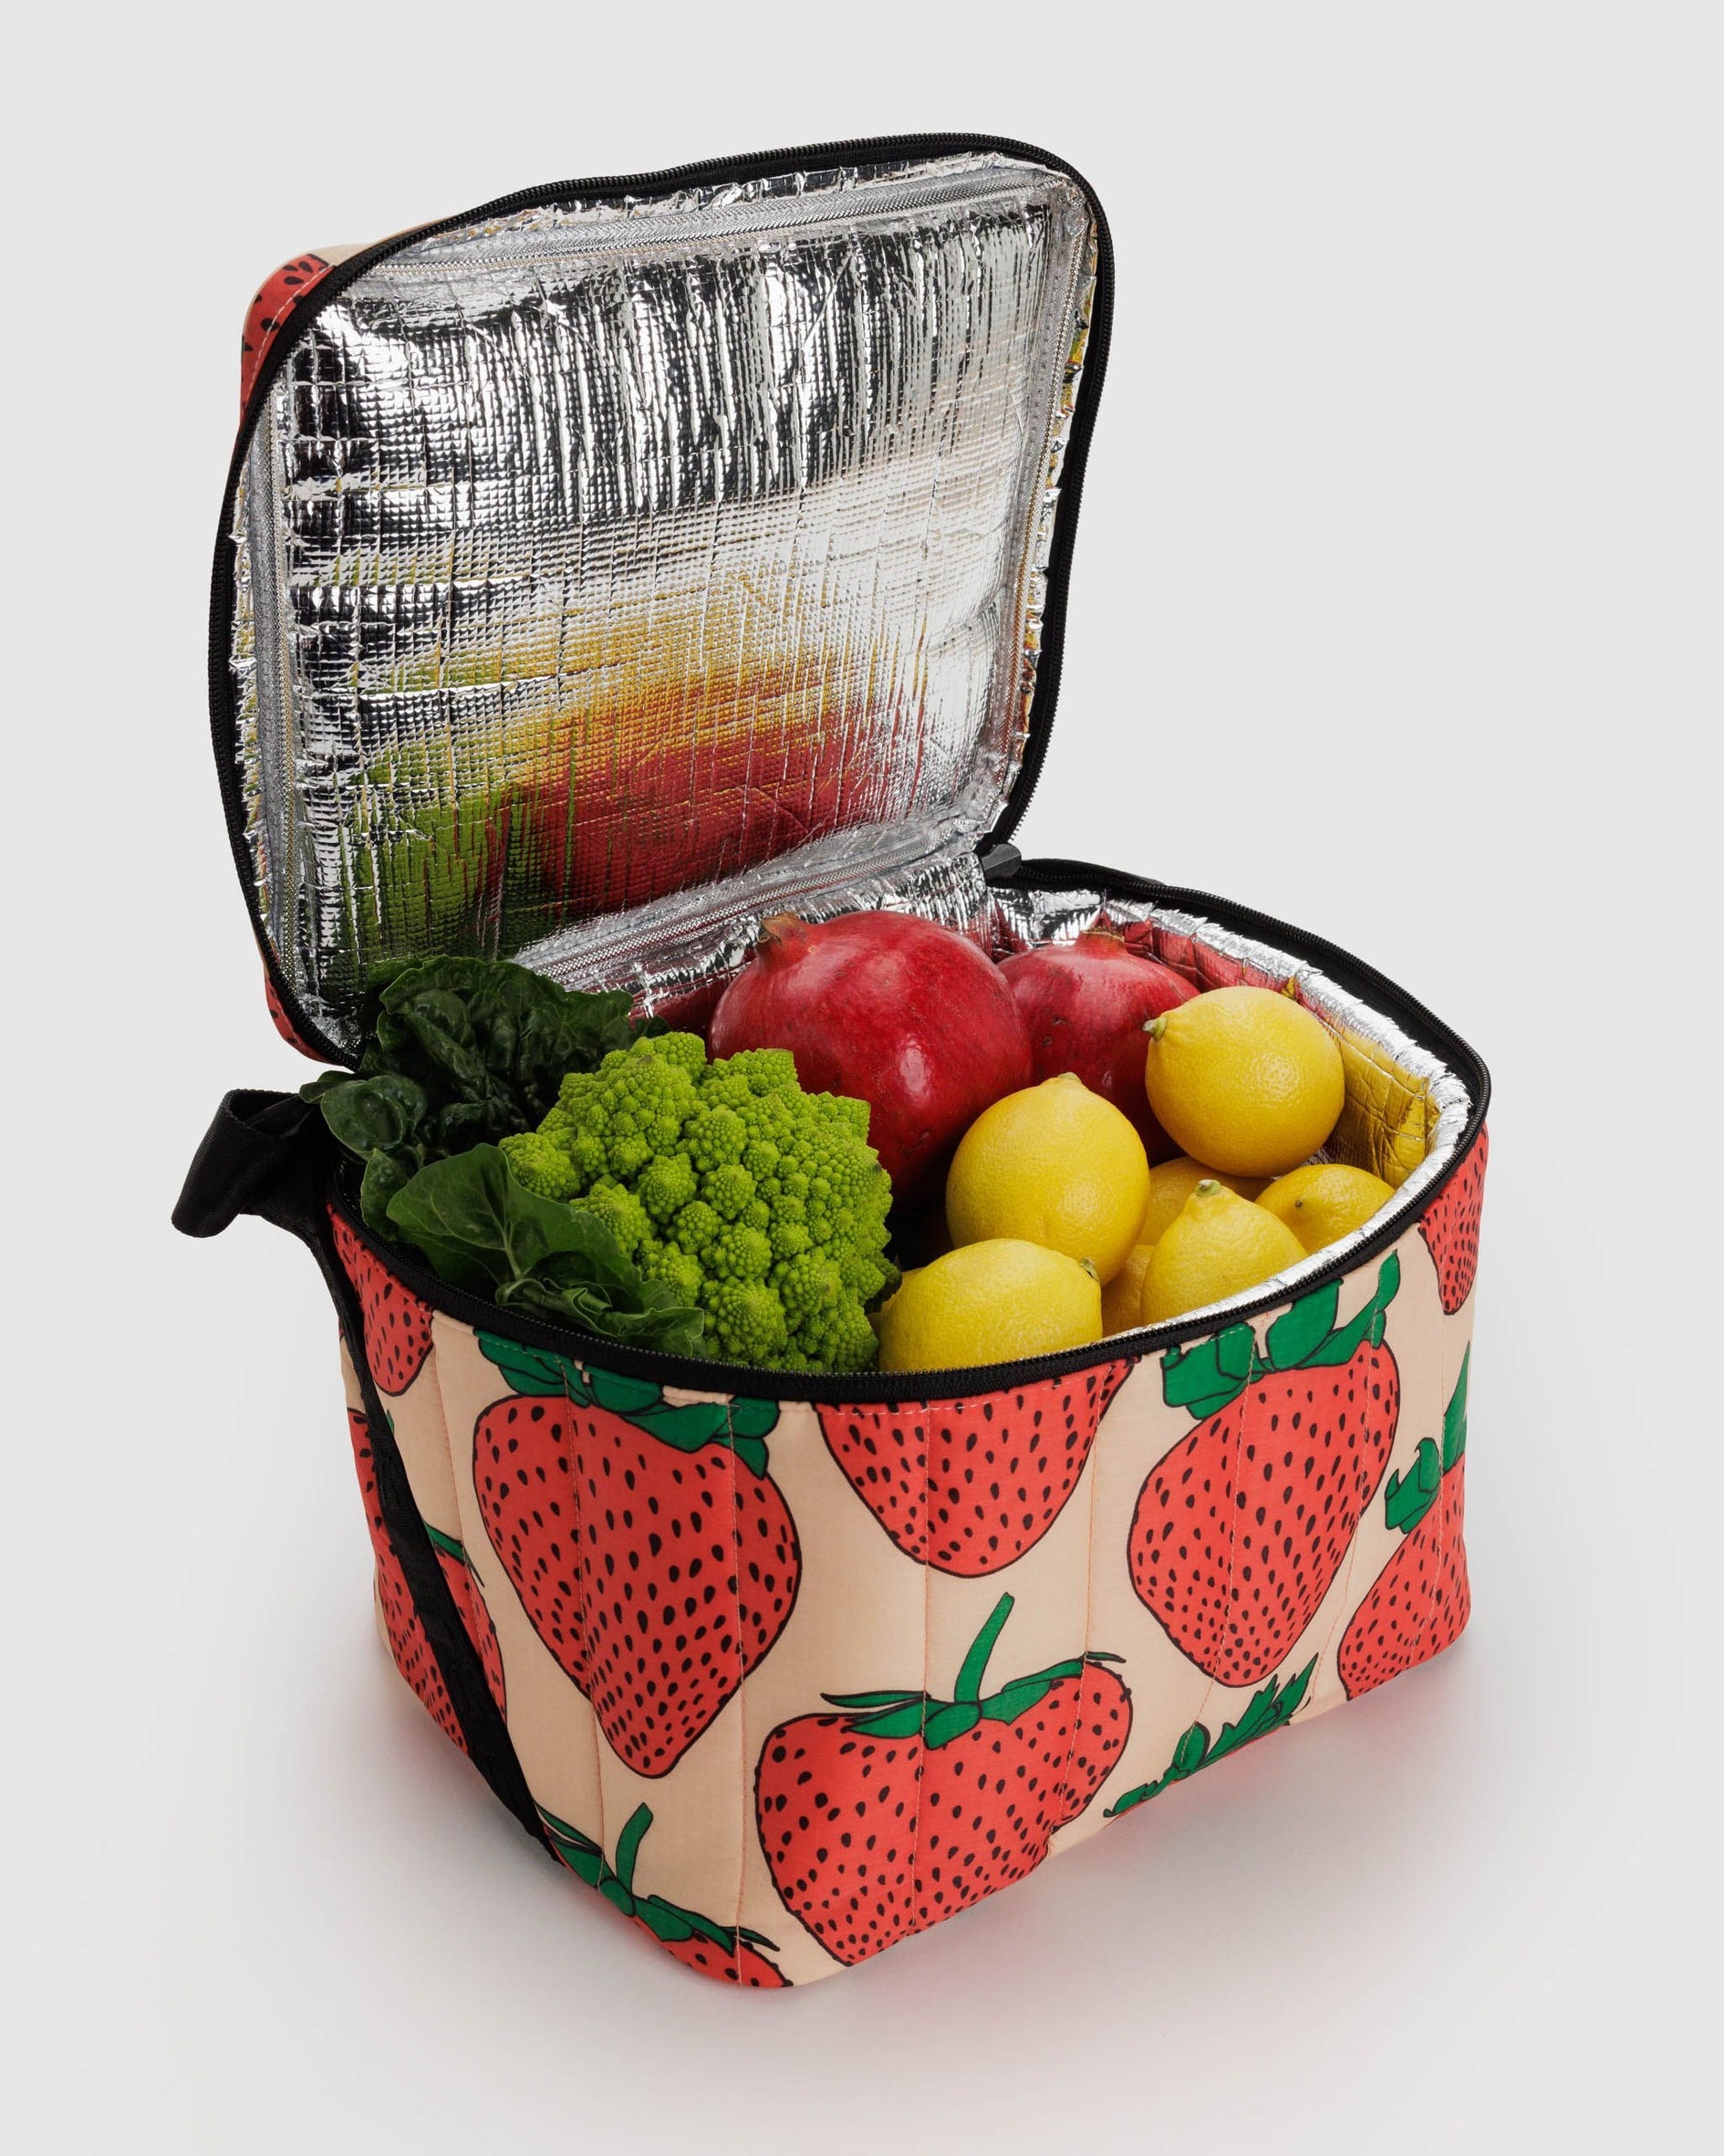 Puffy Cooler Bag, Strawberry